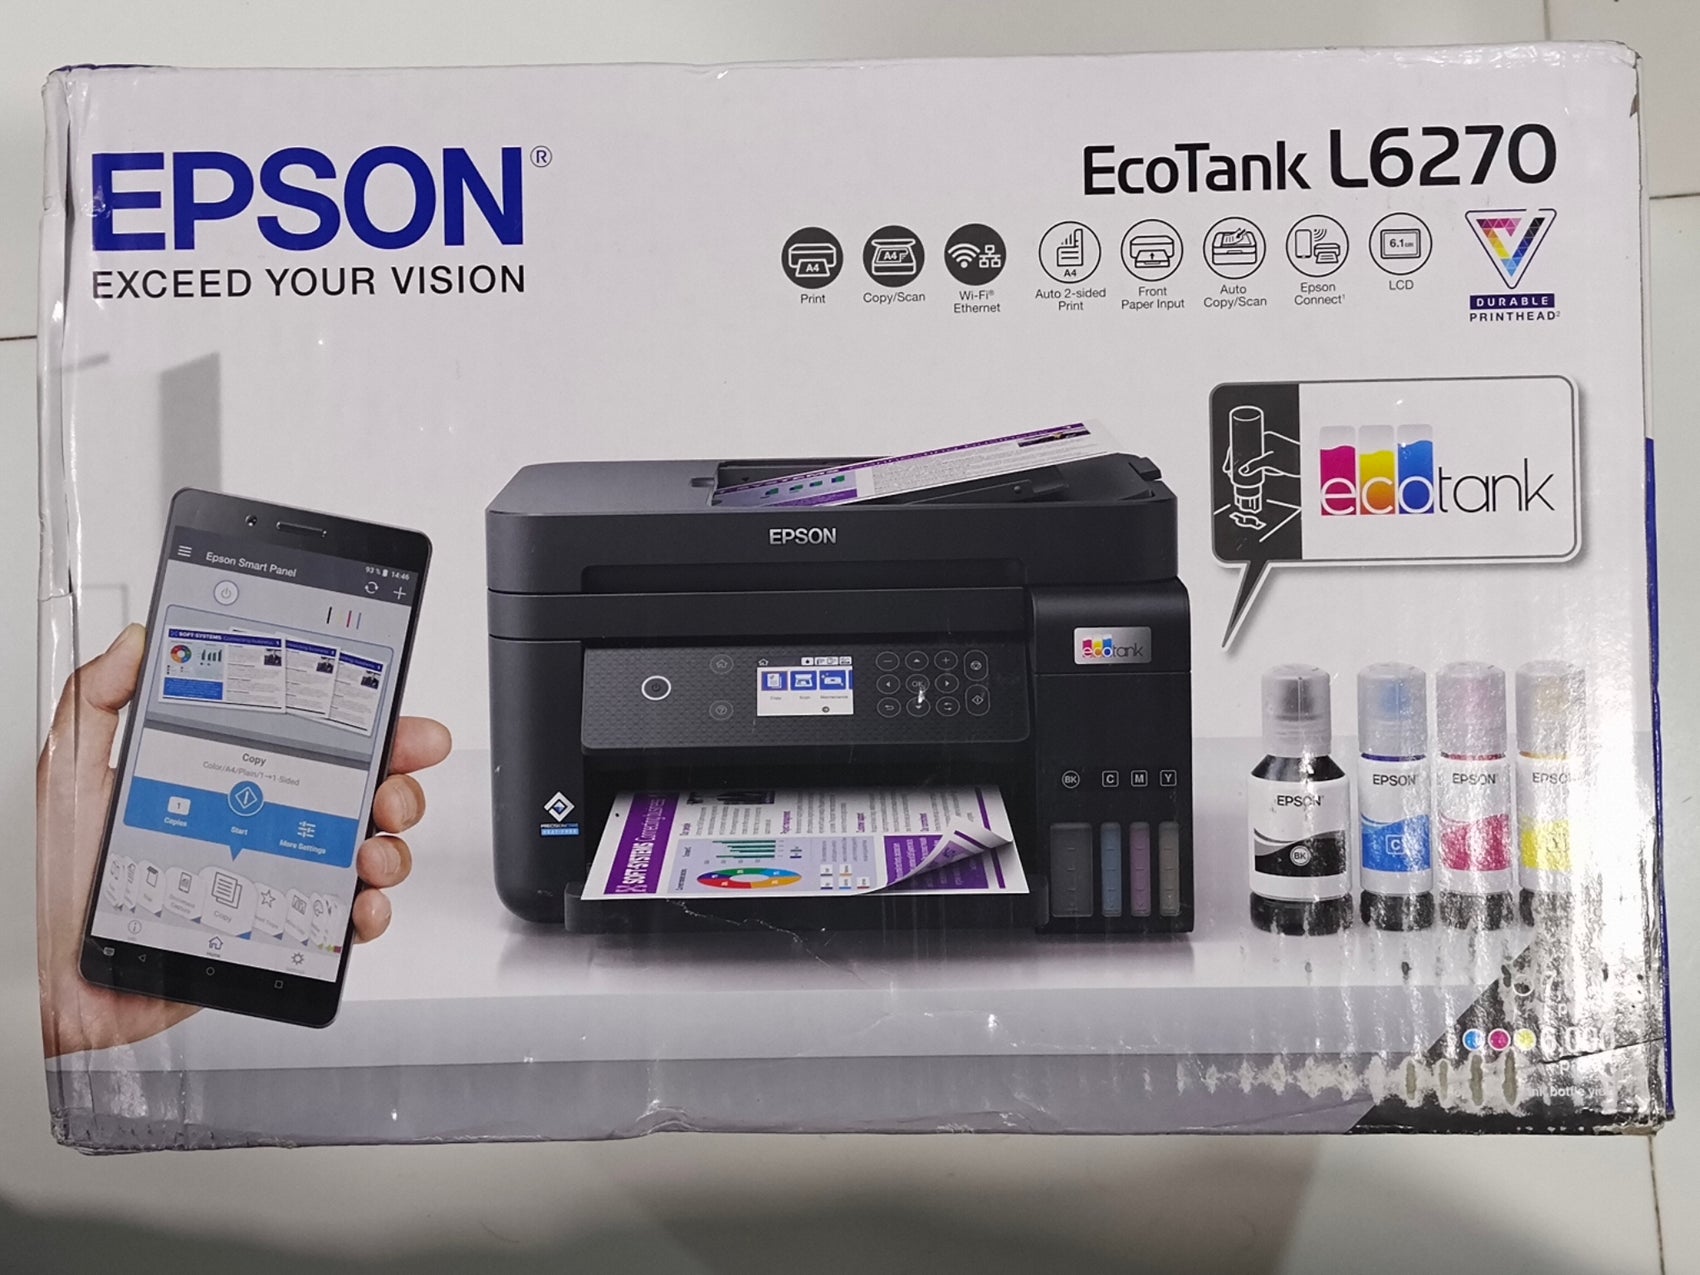 Epson Ecotank L6270 A4 Wi Fi Duplex All In One Ink Tank Printer With A 1868